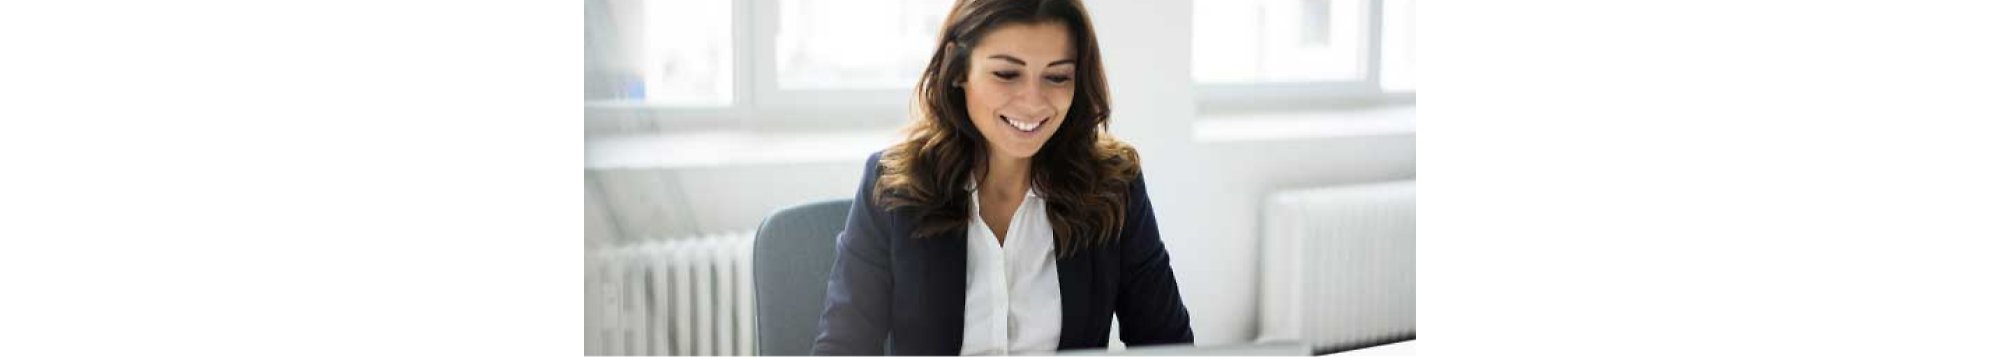 A woman smiling sitting in an office